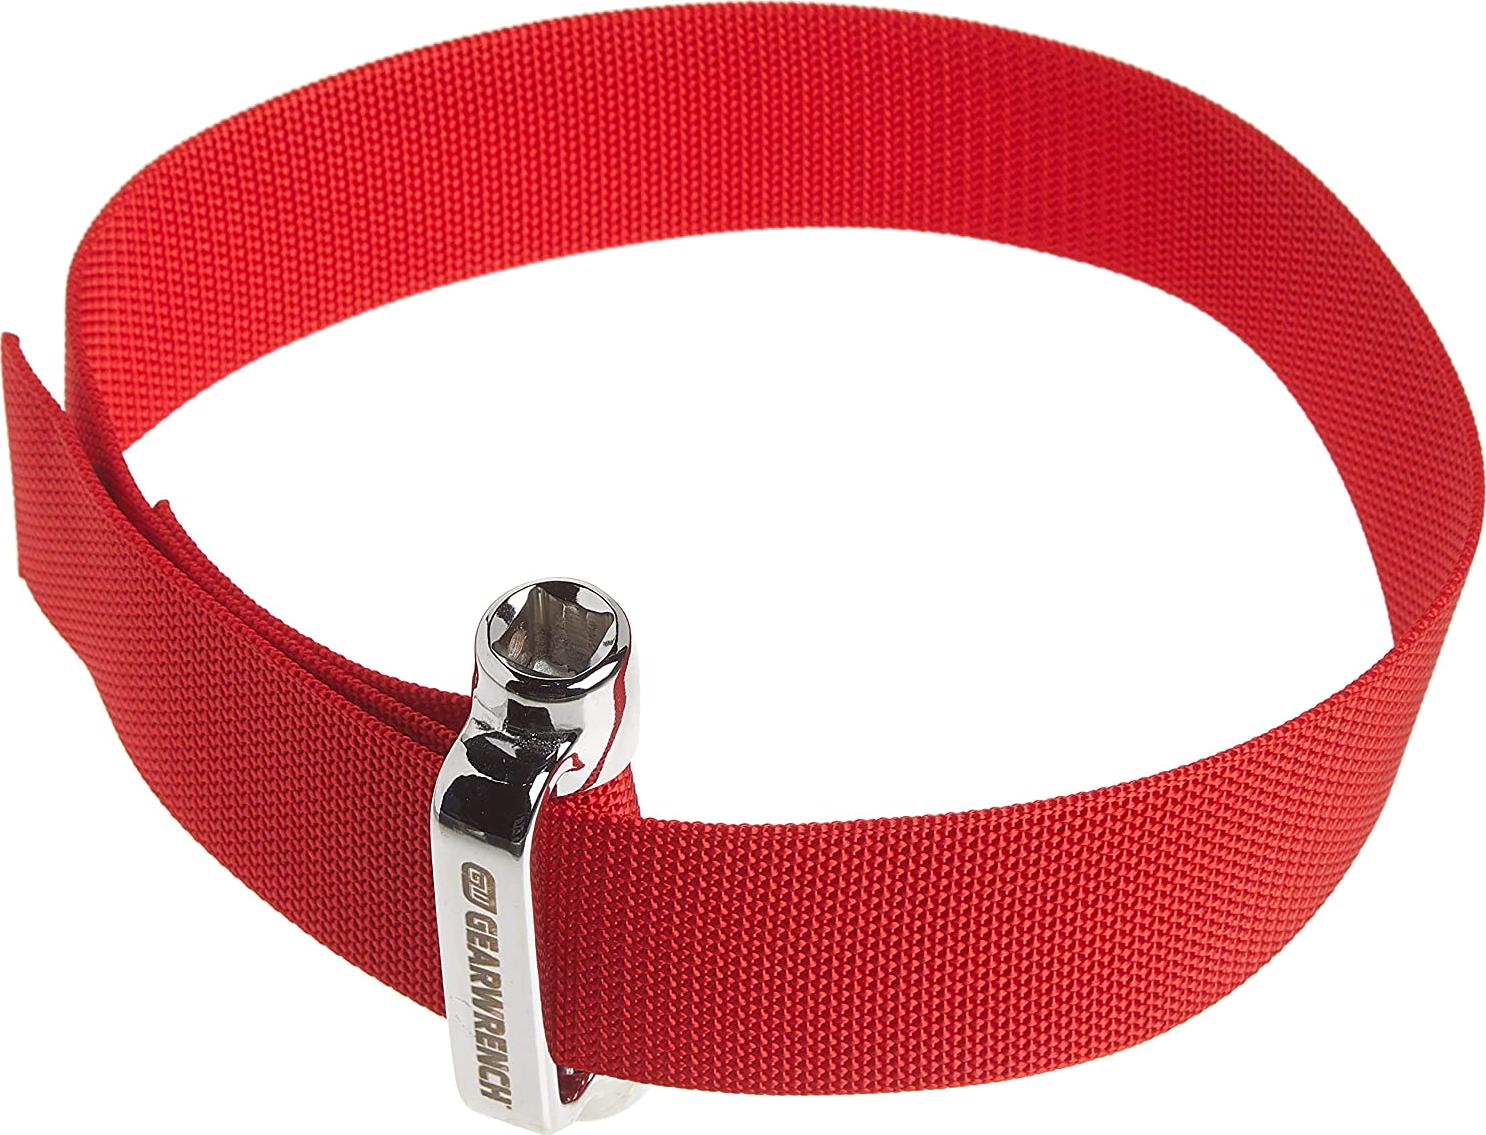 GEARWRENCH, GEARWRENCH 3/8 and 1/2 Drive Heavy-Duty Oil Filter Strap Wrench, 3529D, Red